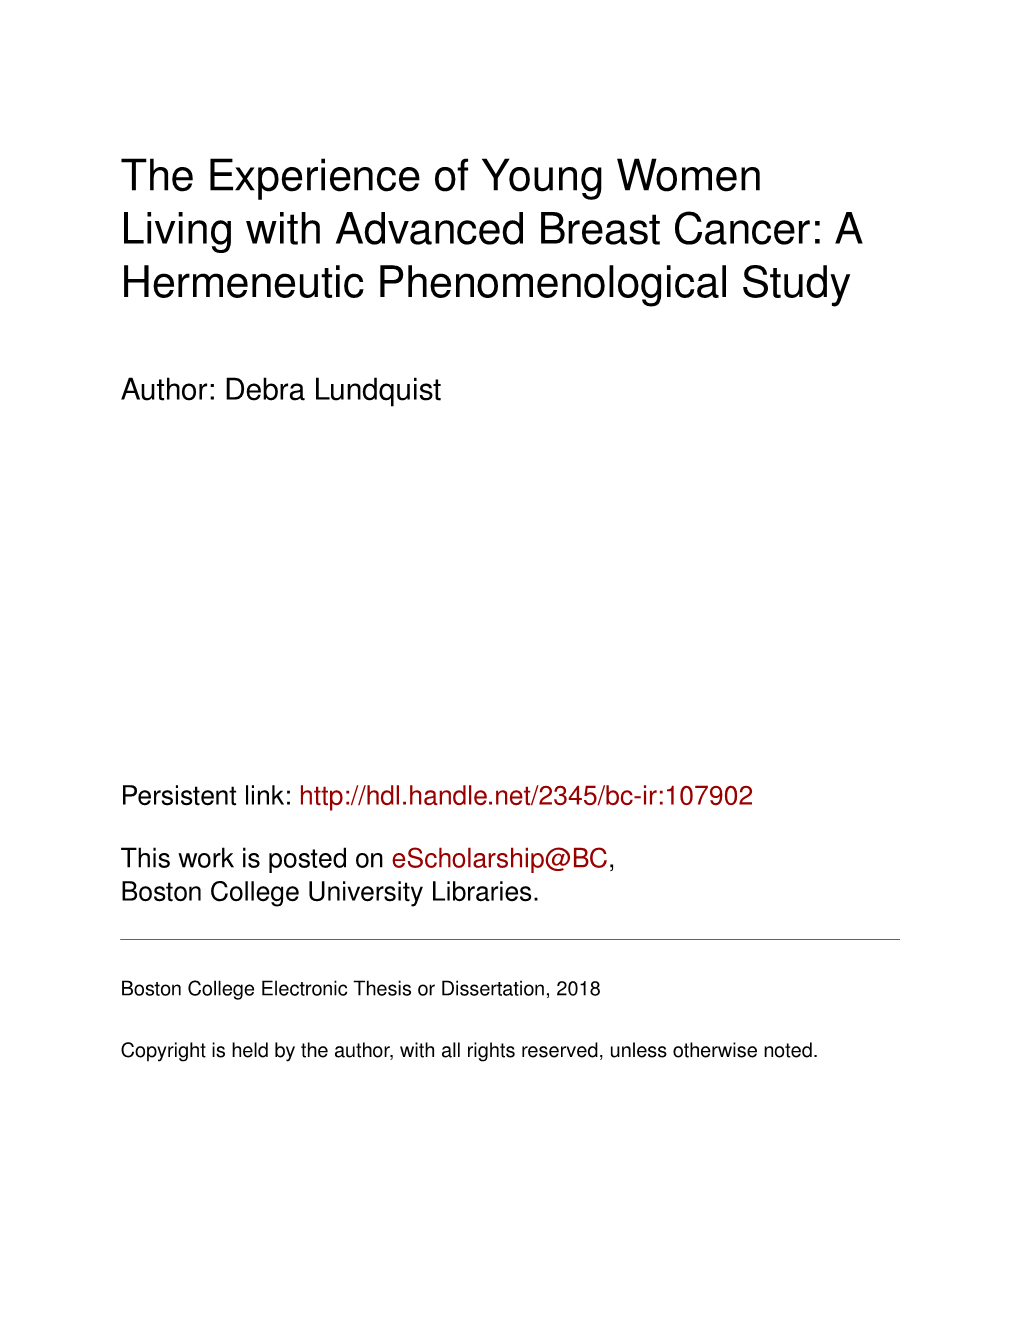 The Experience of Young Women Living with Advanced Breast Cancer: a Hermeneutic Phenomenological Study